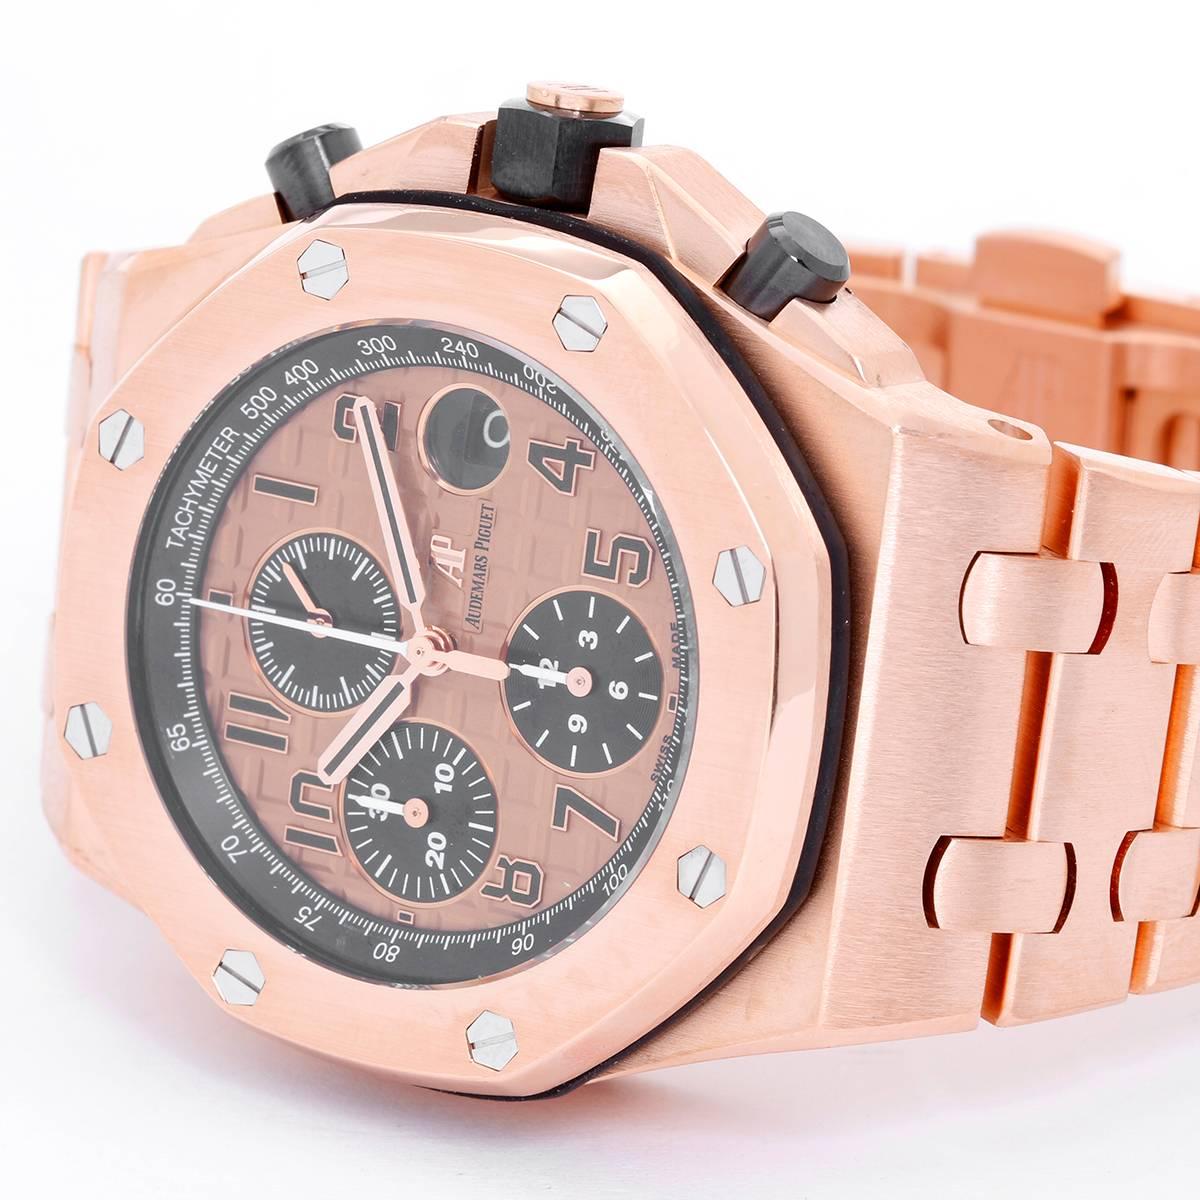 Audemars Piguet Royal Oak Offshore Chronograph 26470.OR.OO.1000OR.01 -  Automatic. Rose gold case ( 42 mm ). Mega Tapisserie patterened Audemars Piguet Rose gold dial with black Roman numerals. Rose gold Audemars Piguet bracelet. Pre-owned with box